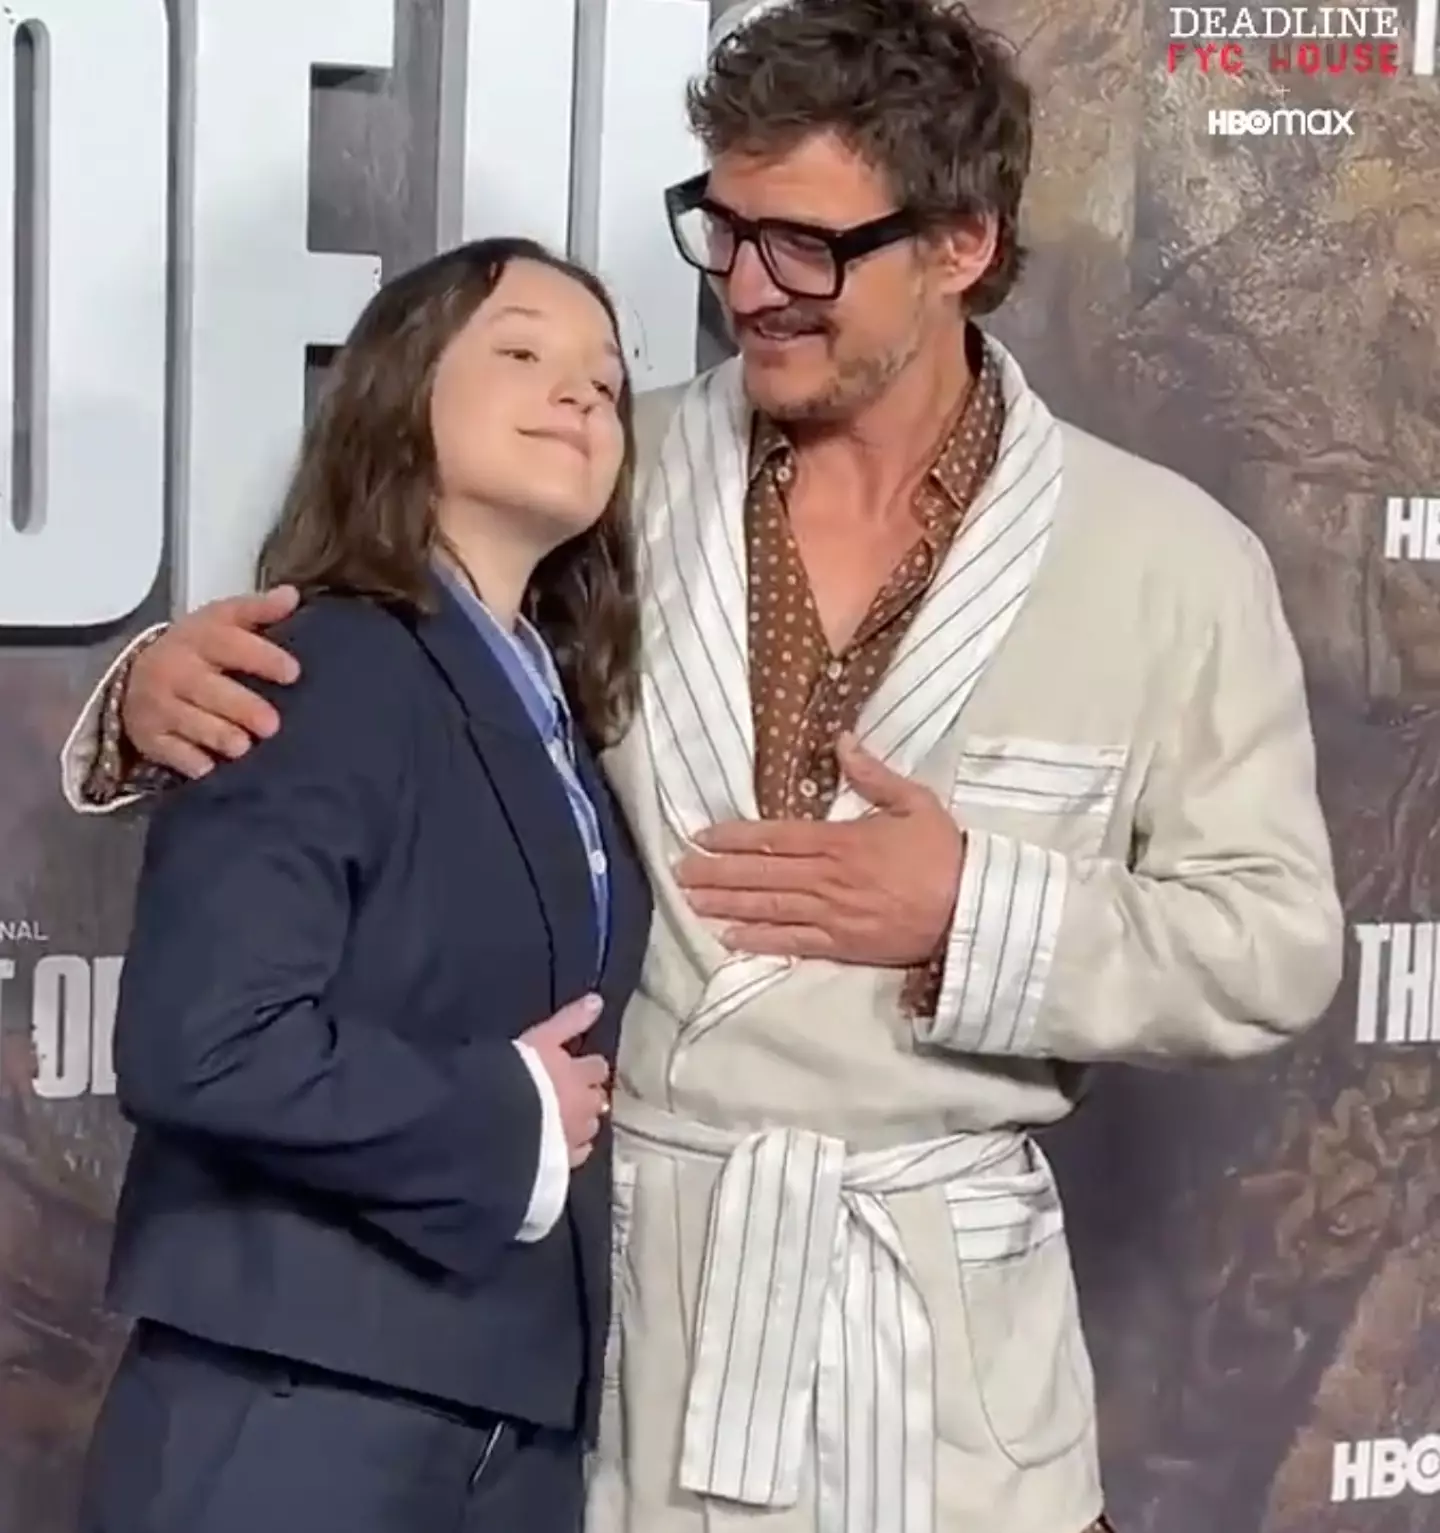 Pedro Pascal has revealed why he places his hand on his chest during photo shoots.